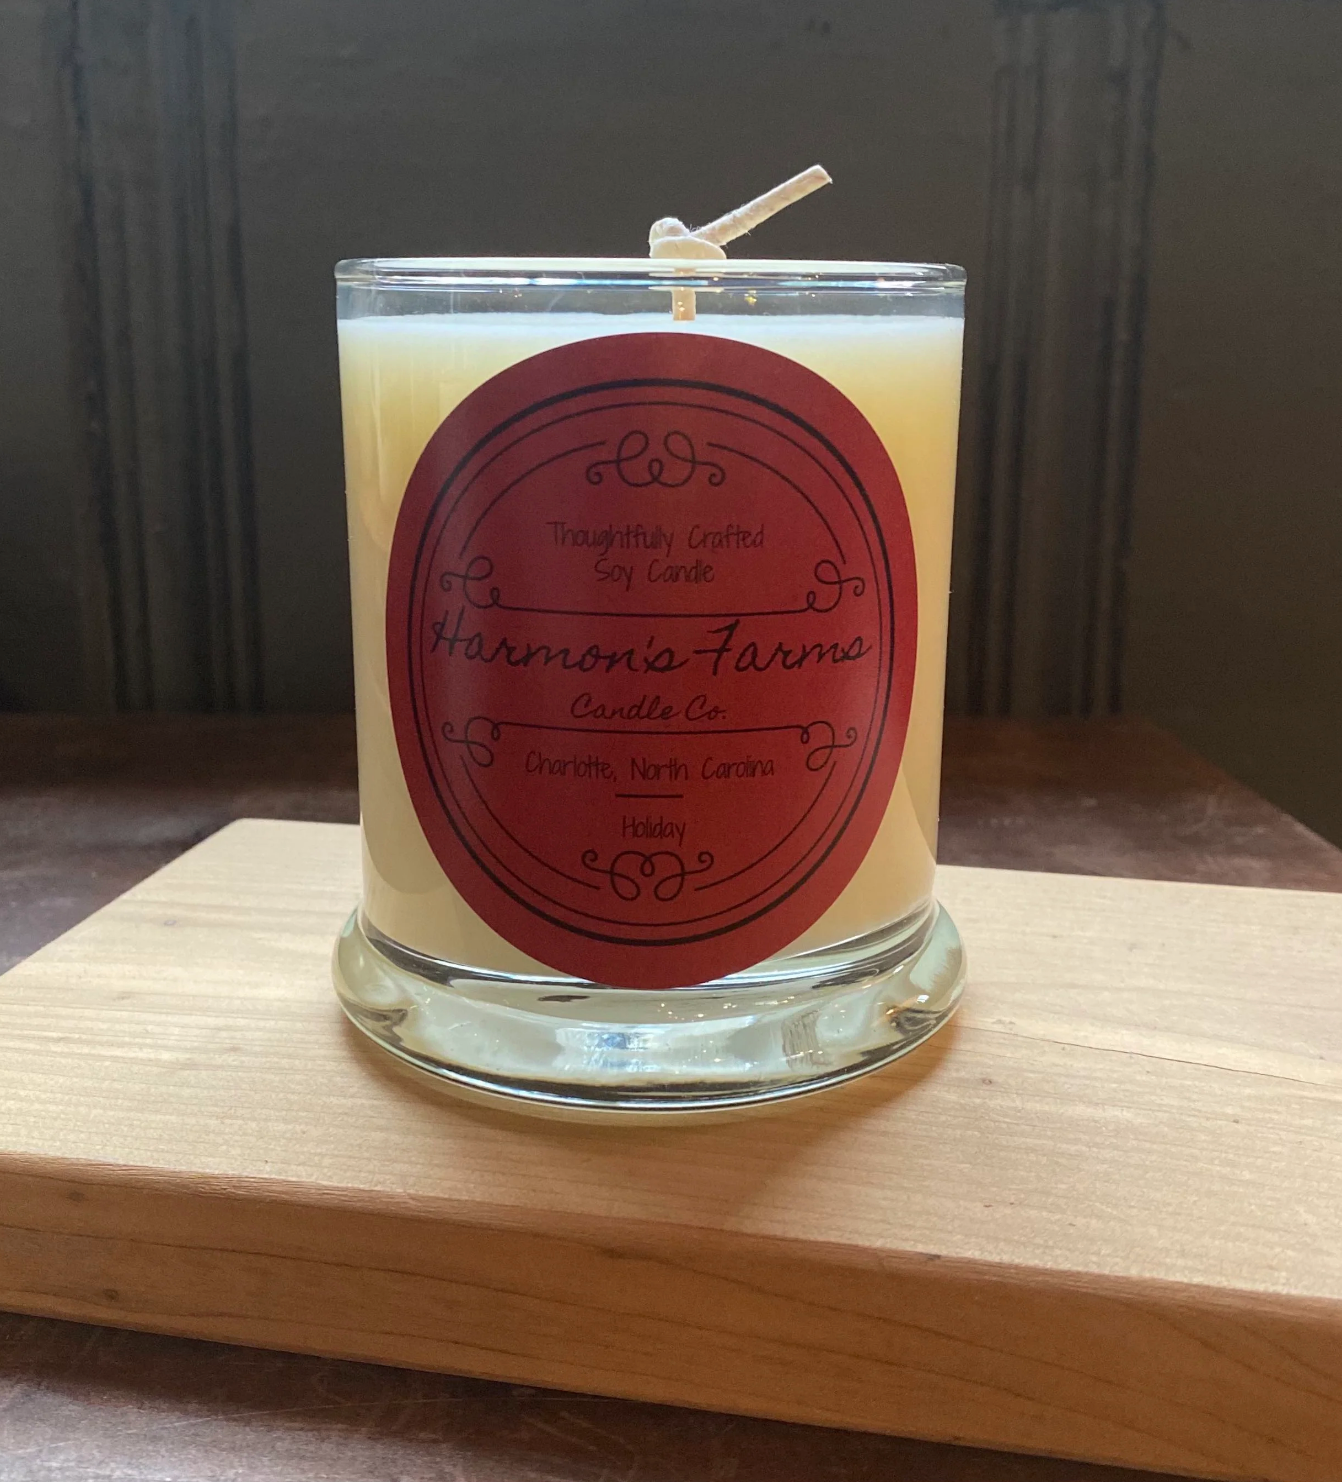 Harmon’s Farms Candle Co. Single Wick Candles